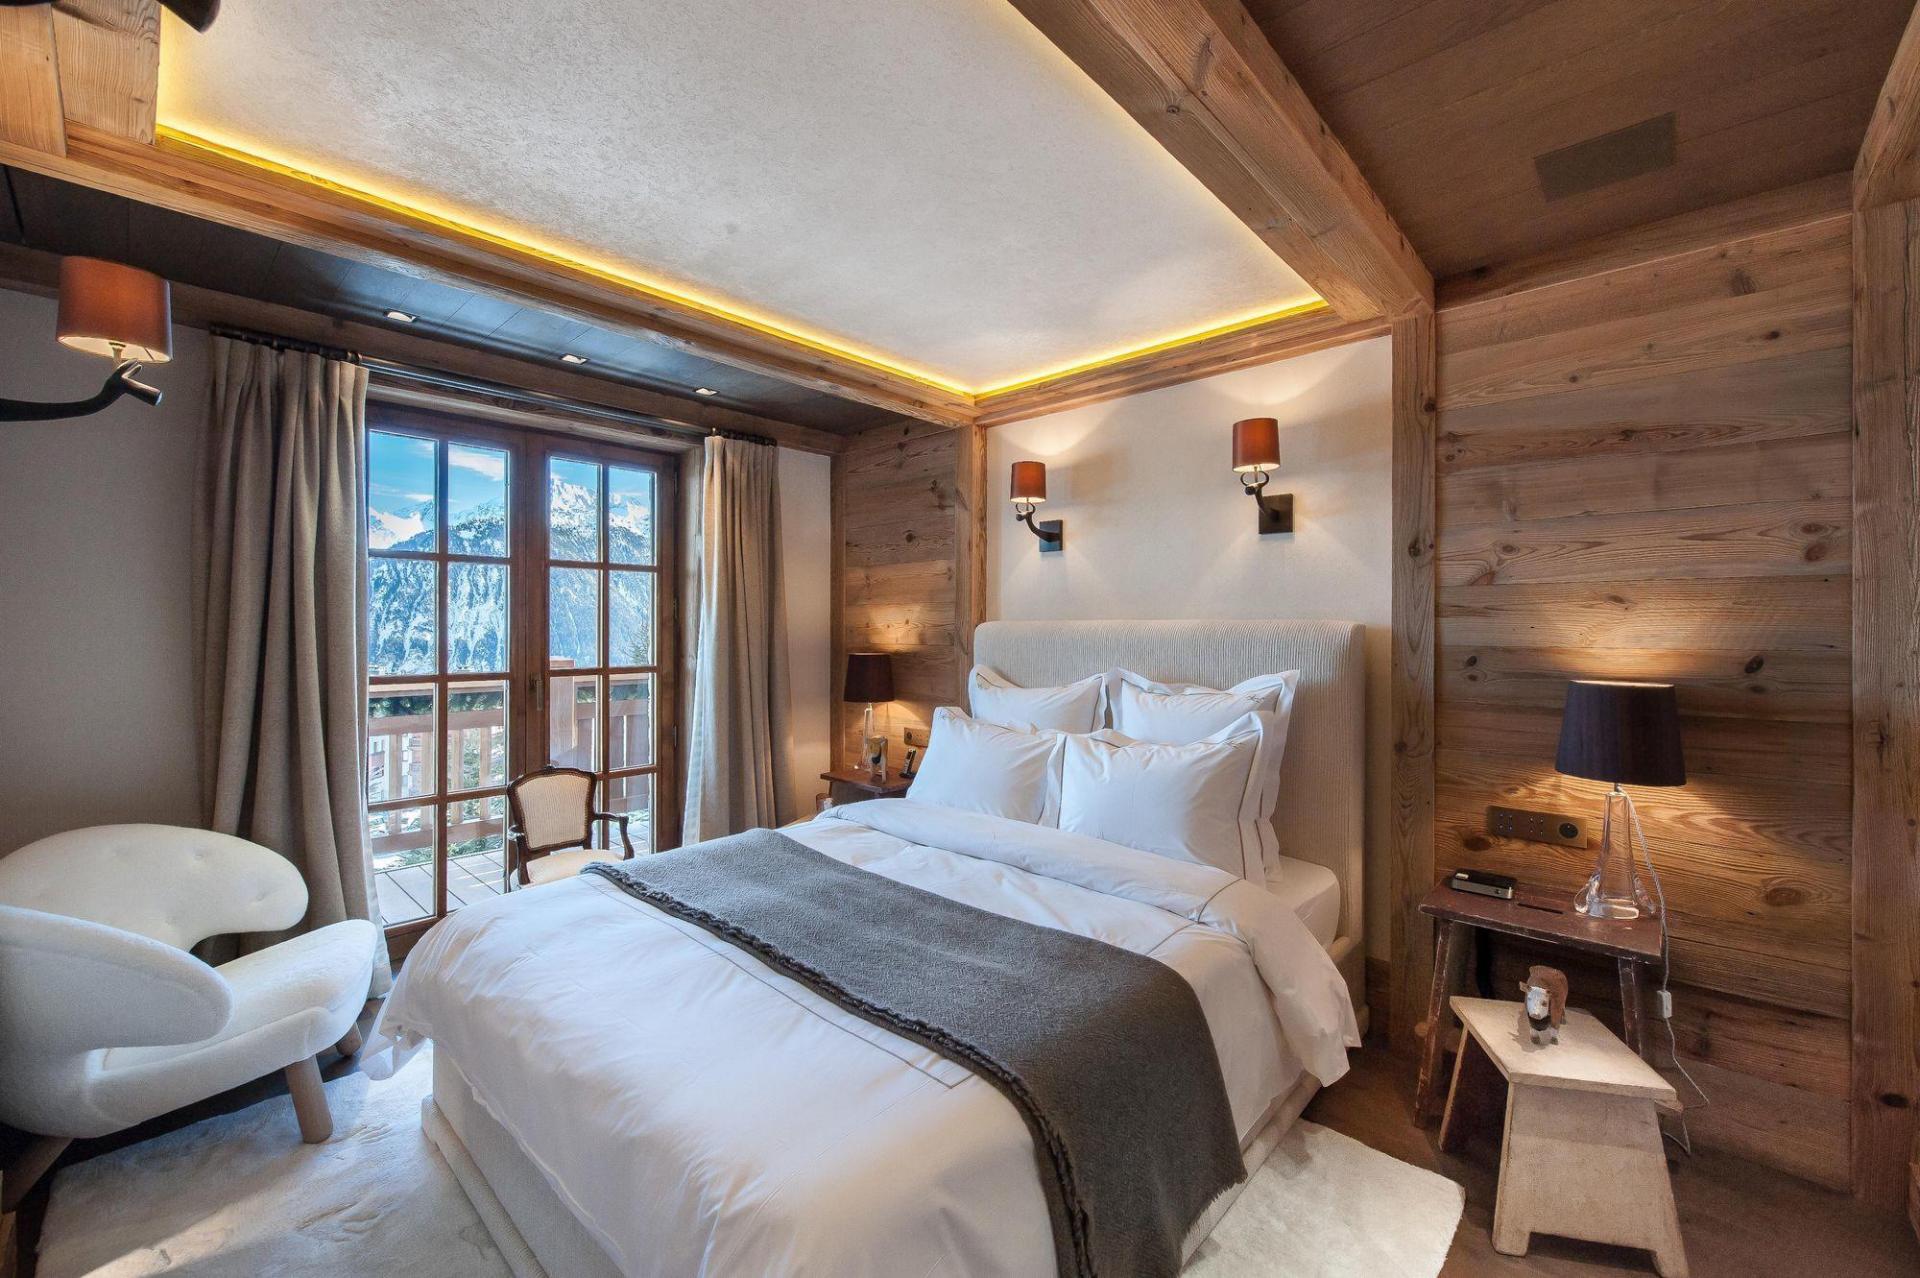 ONE OF THE BEDROOMS OF CHALET DES CHENUS SKI RENTAL